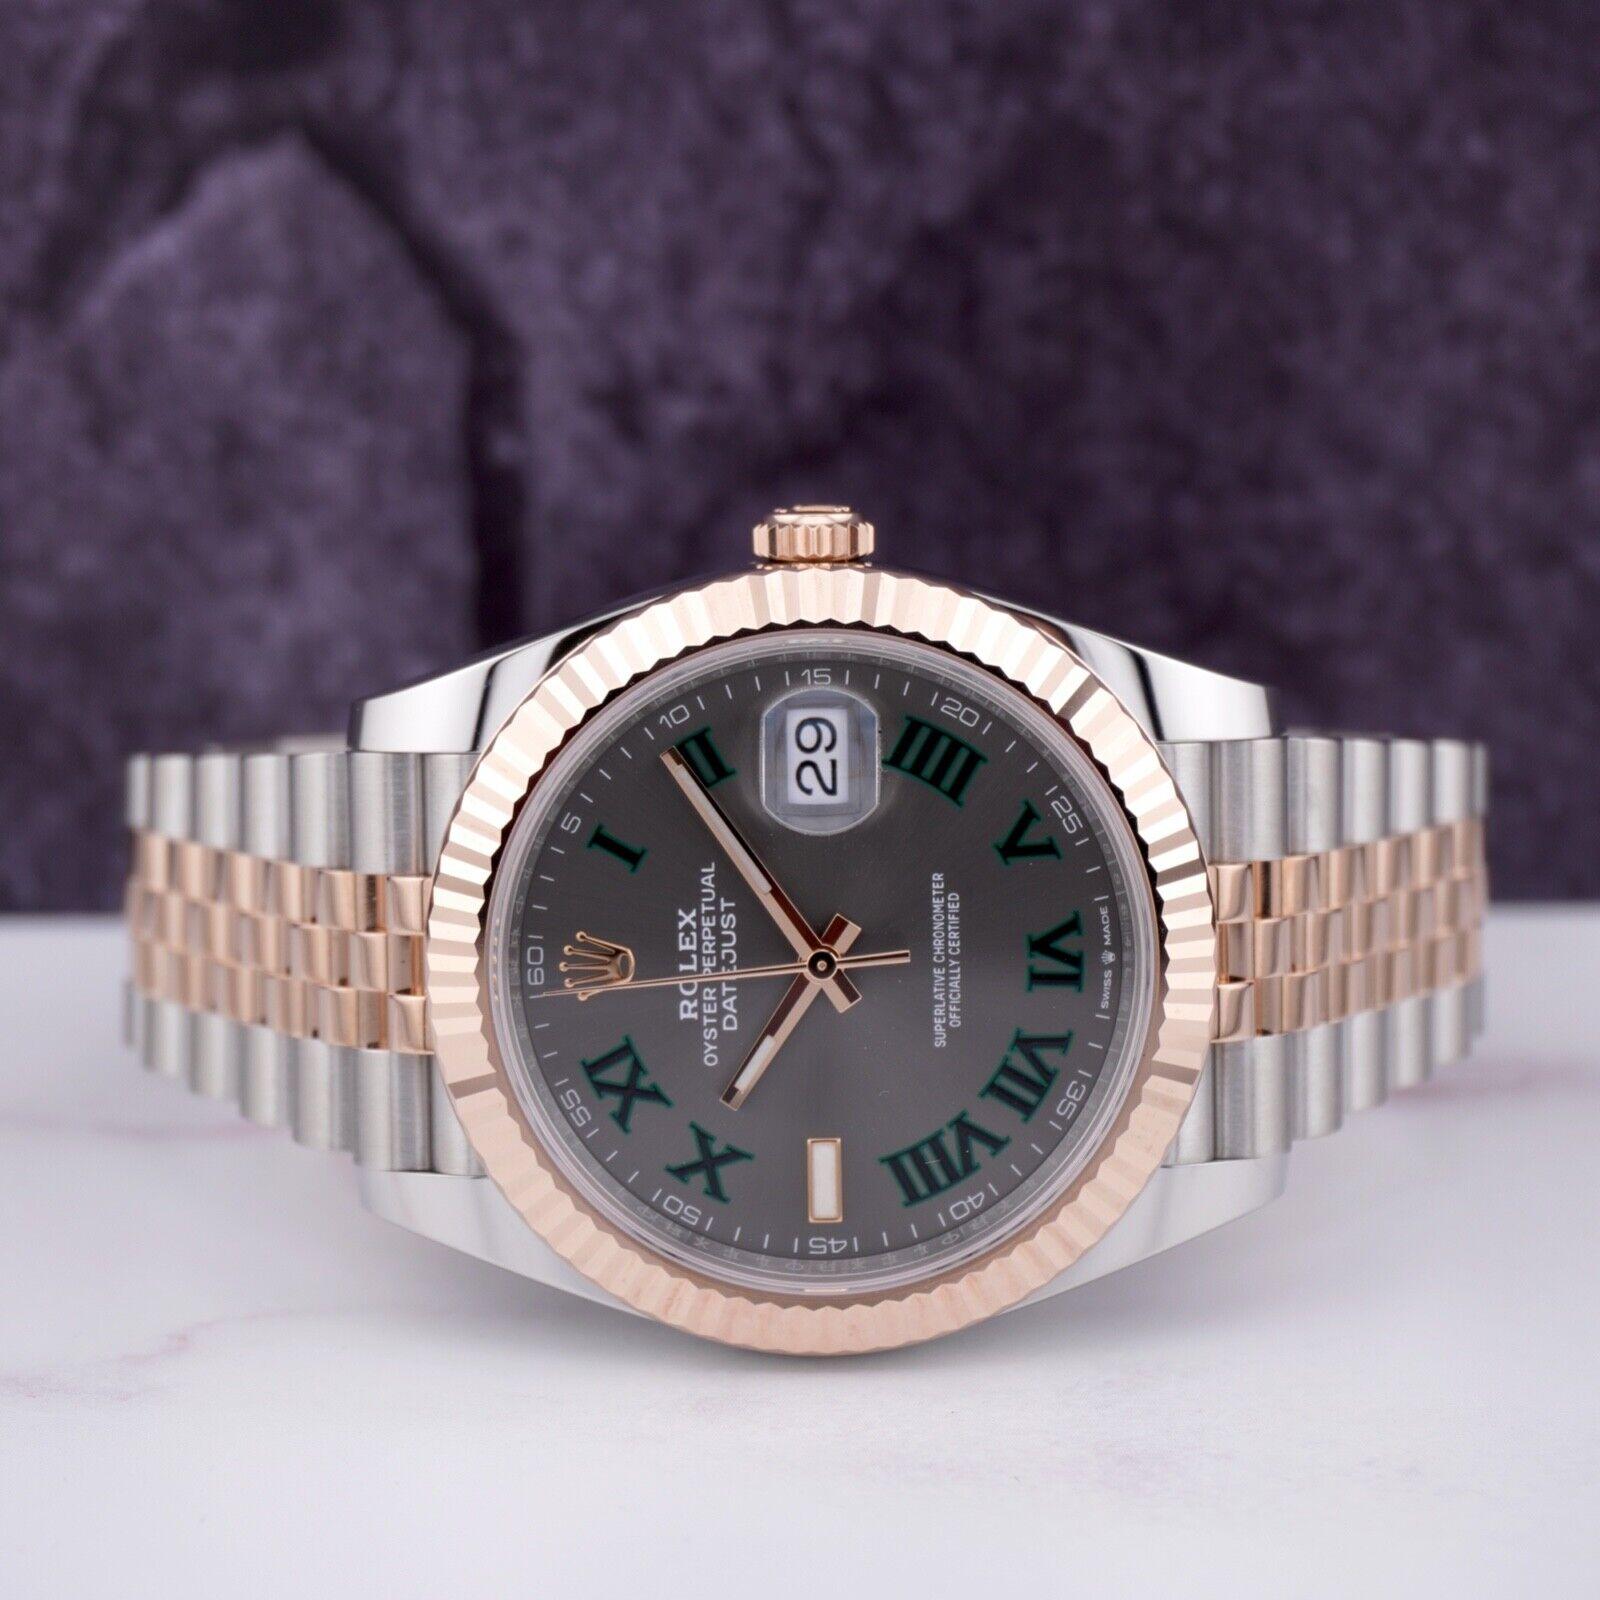 Rolex Datejust 41mm Watch. A Pre-owned watch w/ Original Box and 2023 Card. Watch is 100% Authentic and Comes with Authenticity Card. Watch Reference is 126331 and is in Excellent Condition (See Pictures). The dial color is Wimbledon and Material is